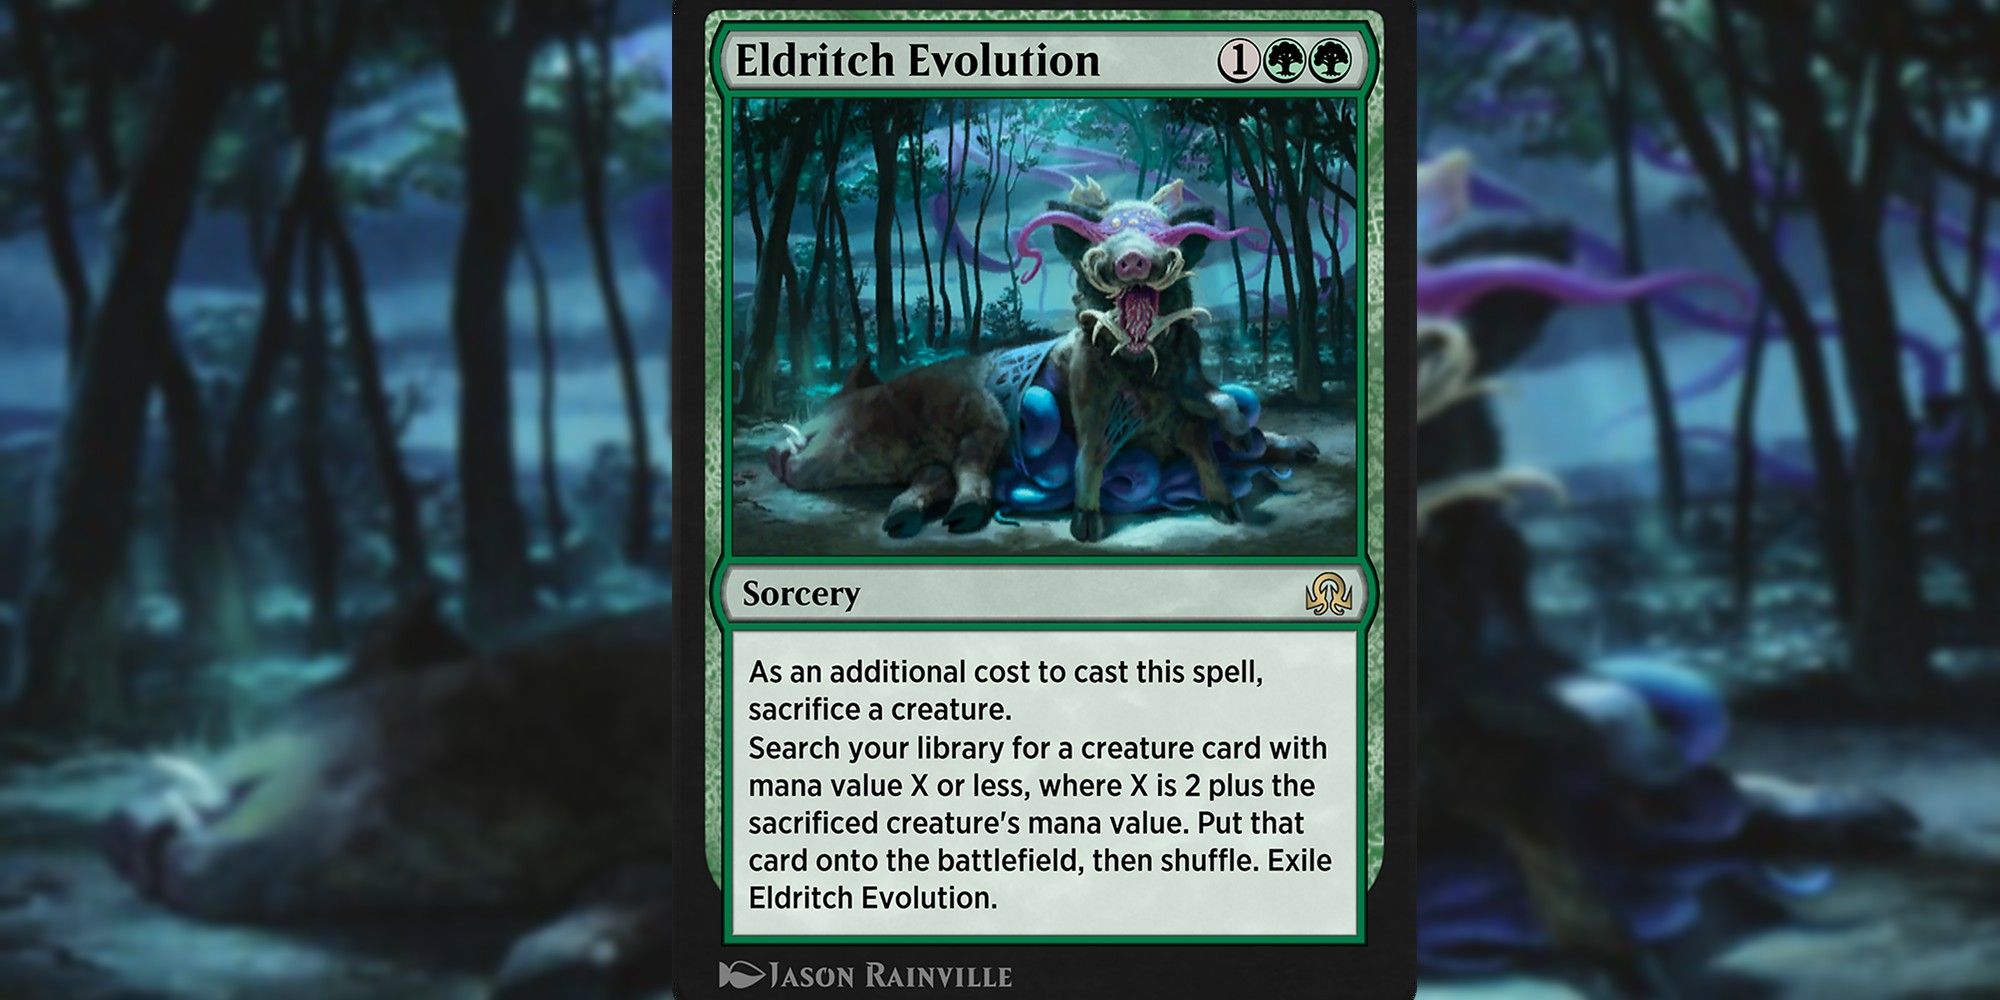 Image of the Eldritch Evolution card in Magic: The Gathering, with art by Jason Rainville